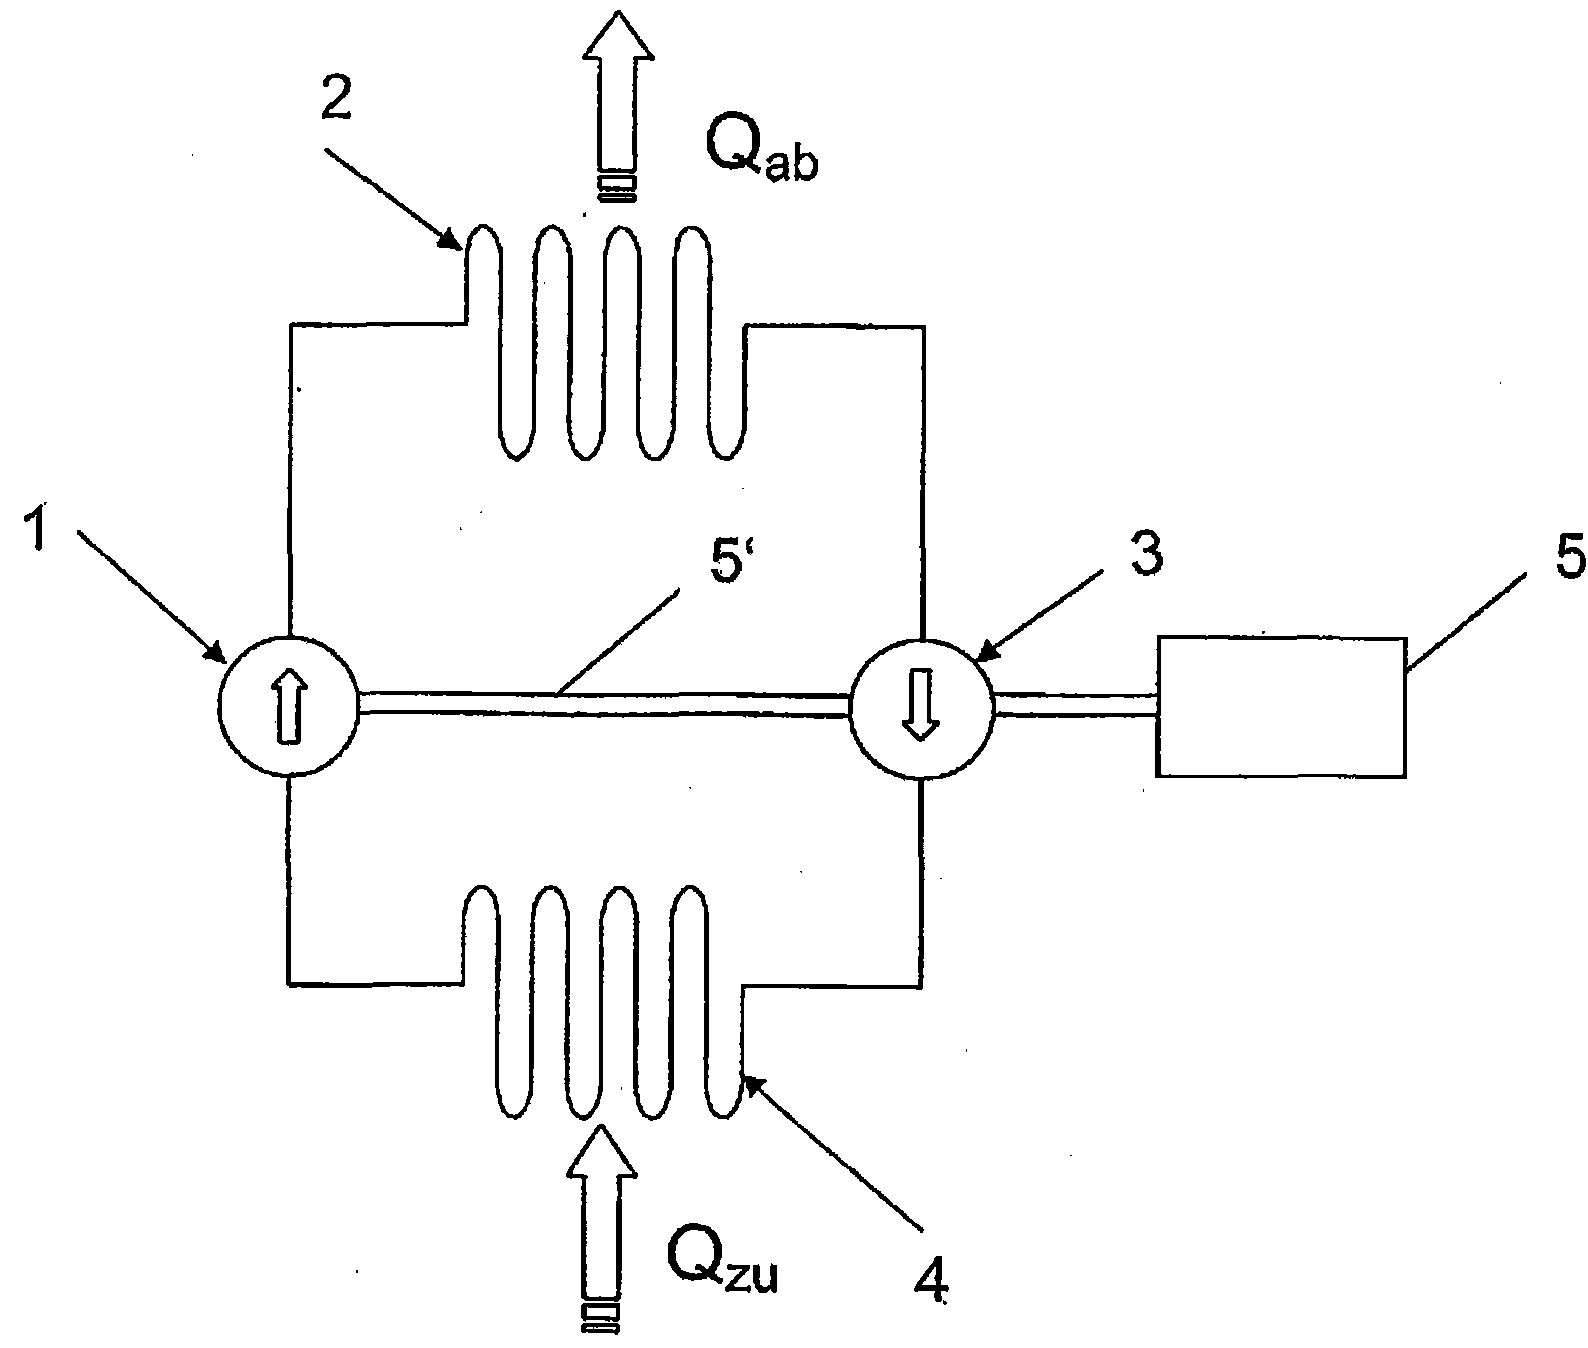 Method for converting thermal energy at a low temperature into thermal energy at a relatively high temperature by means of mechanical energy, and vice versa